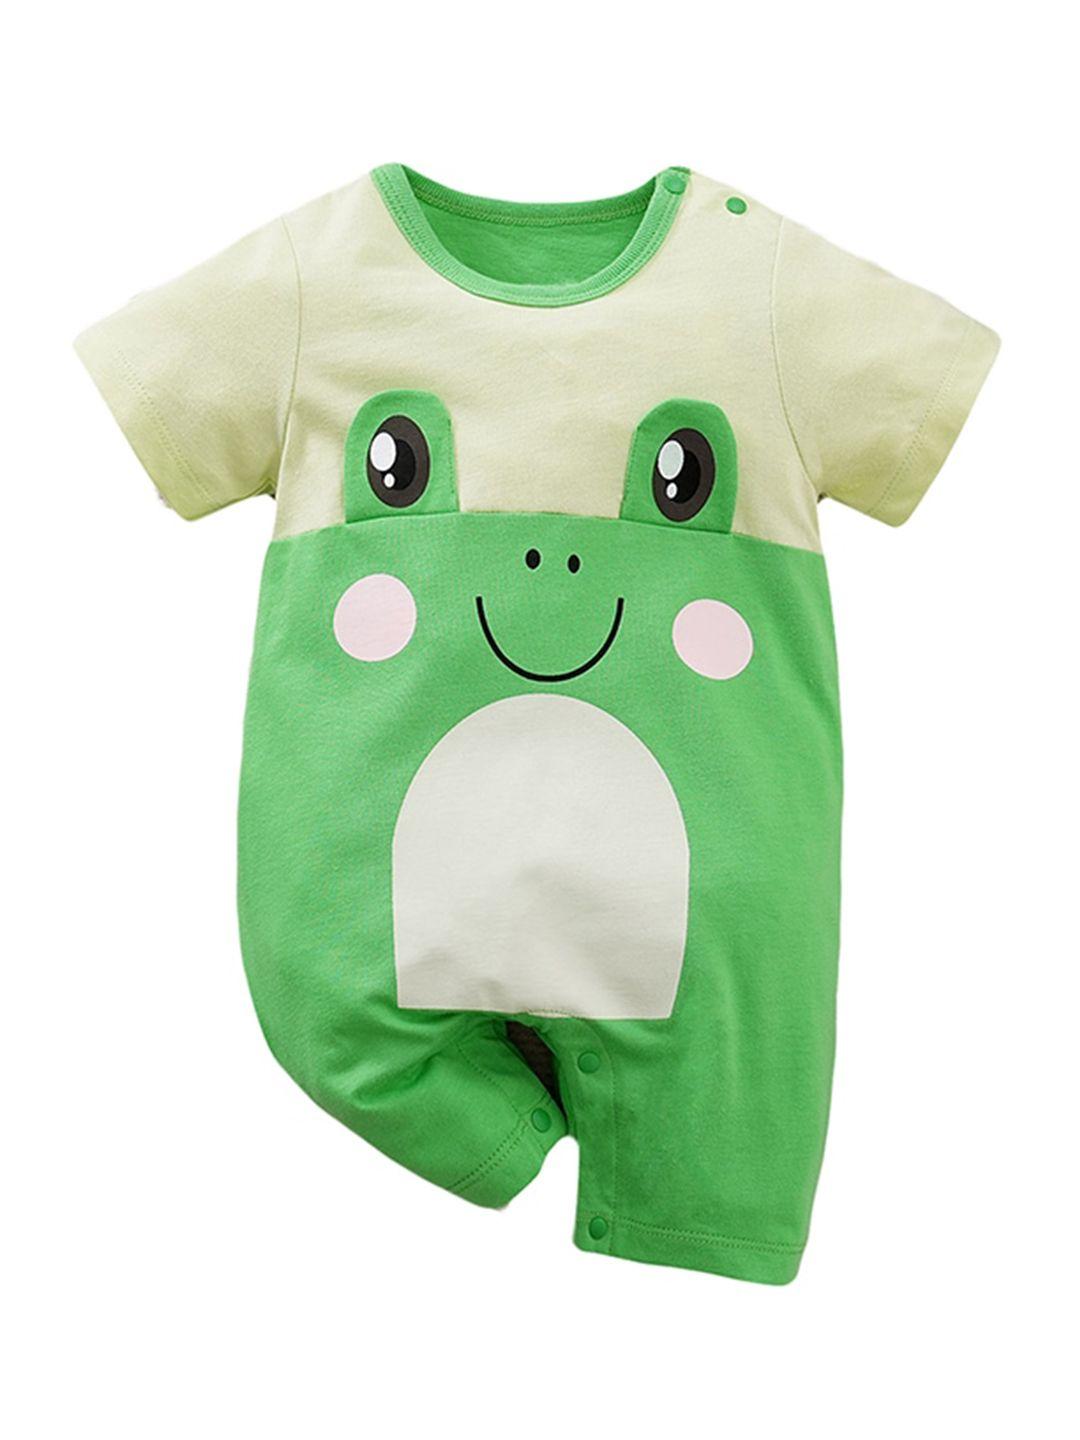 stylecast infants green graphic printed pure cotton rompers